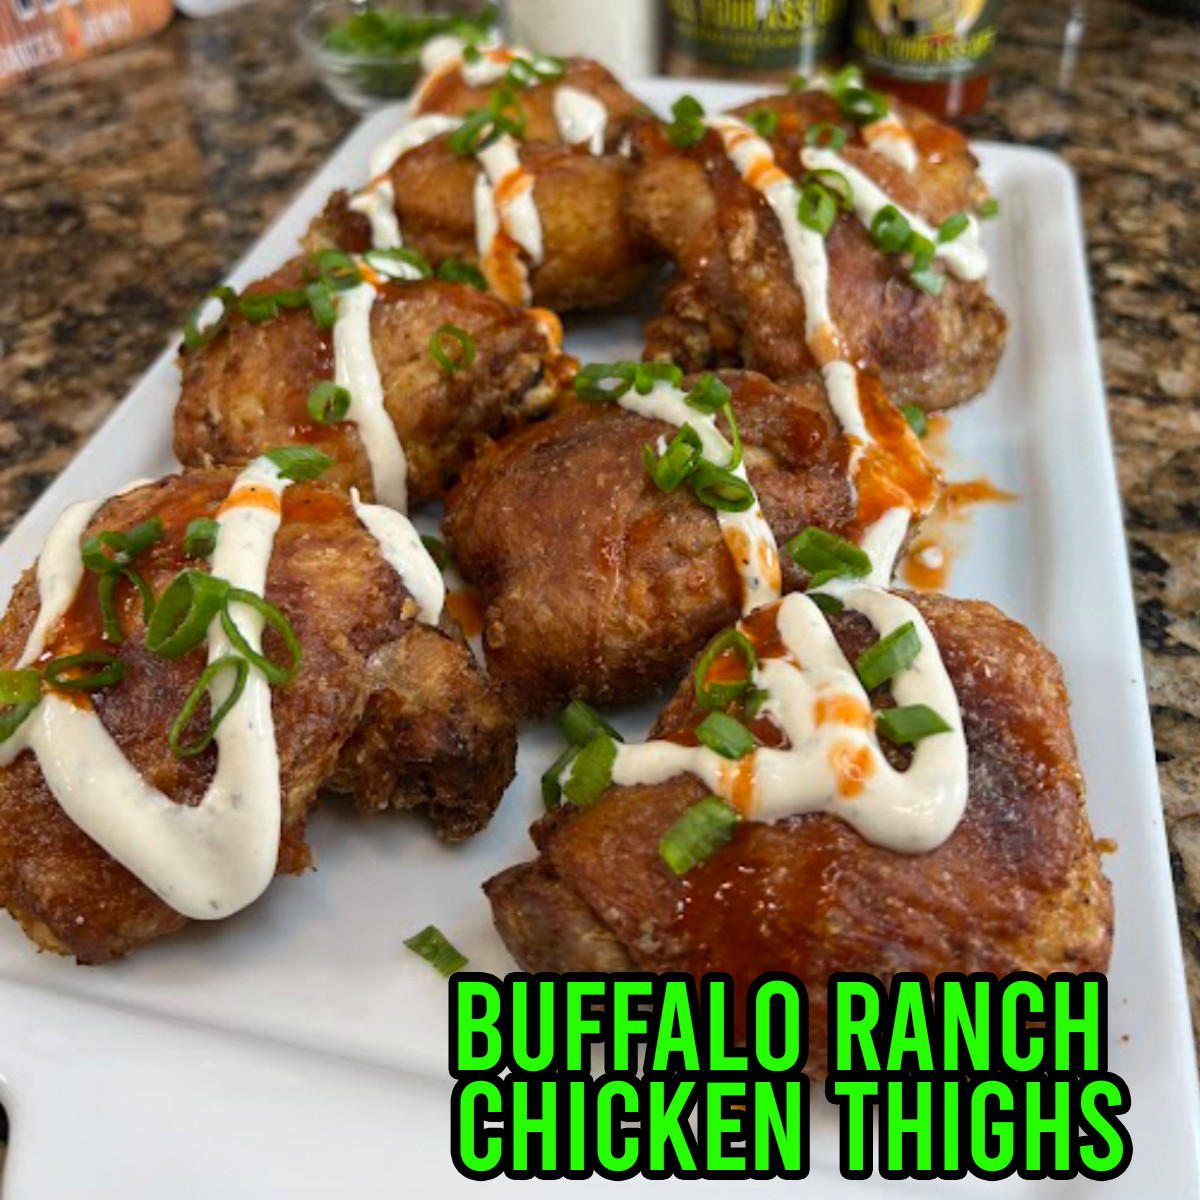 Chicken Thighs, Cannibal All Purpose Spice, Ranch Dip, Fire Chief Hot Sauce, BUFFALO RANCH CHICKEN THIGHS